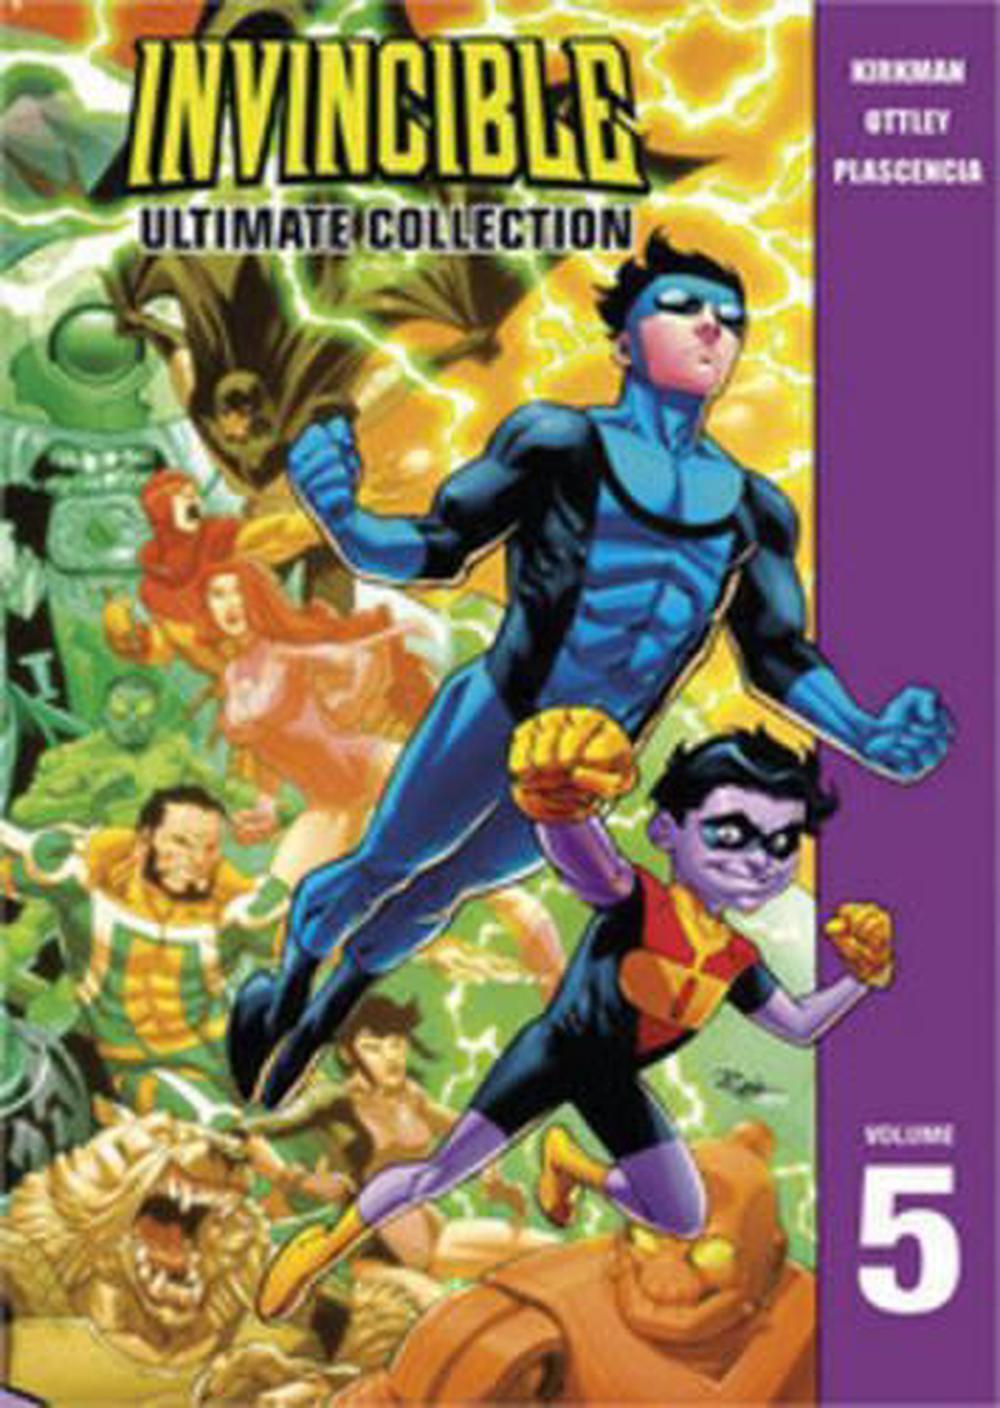 Invincible: The Ultimate Collection Volume 5 by Robert Kirkman (English) Hardcov